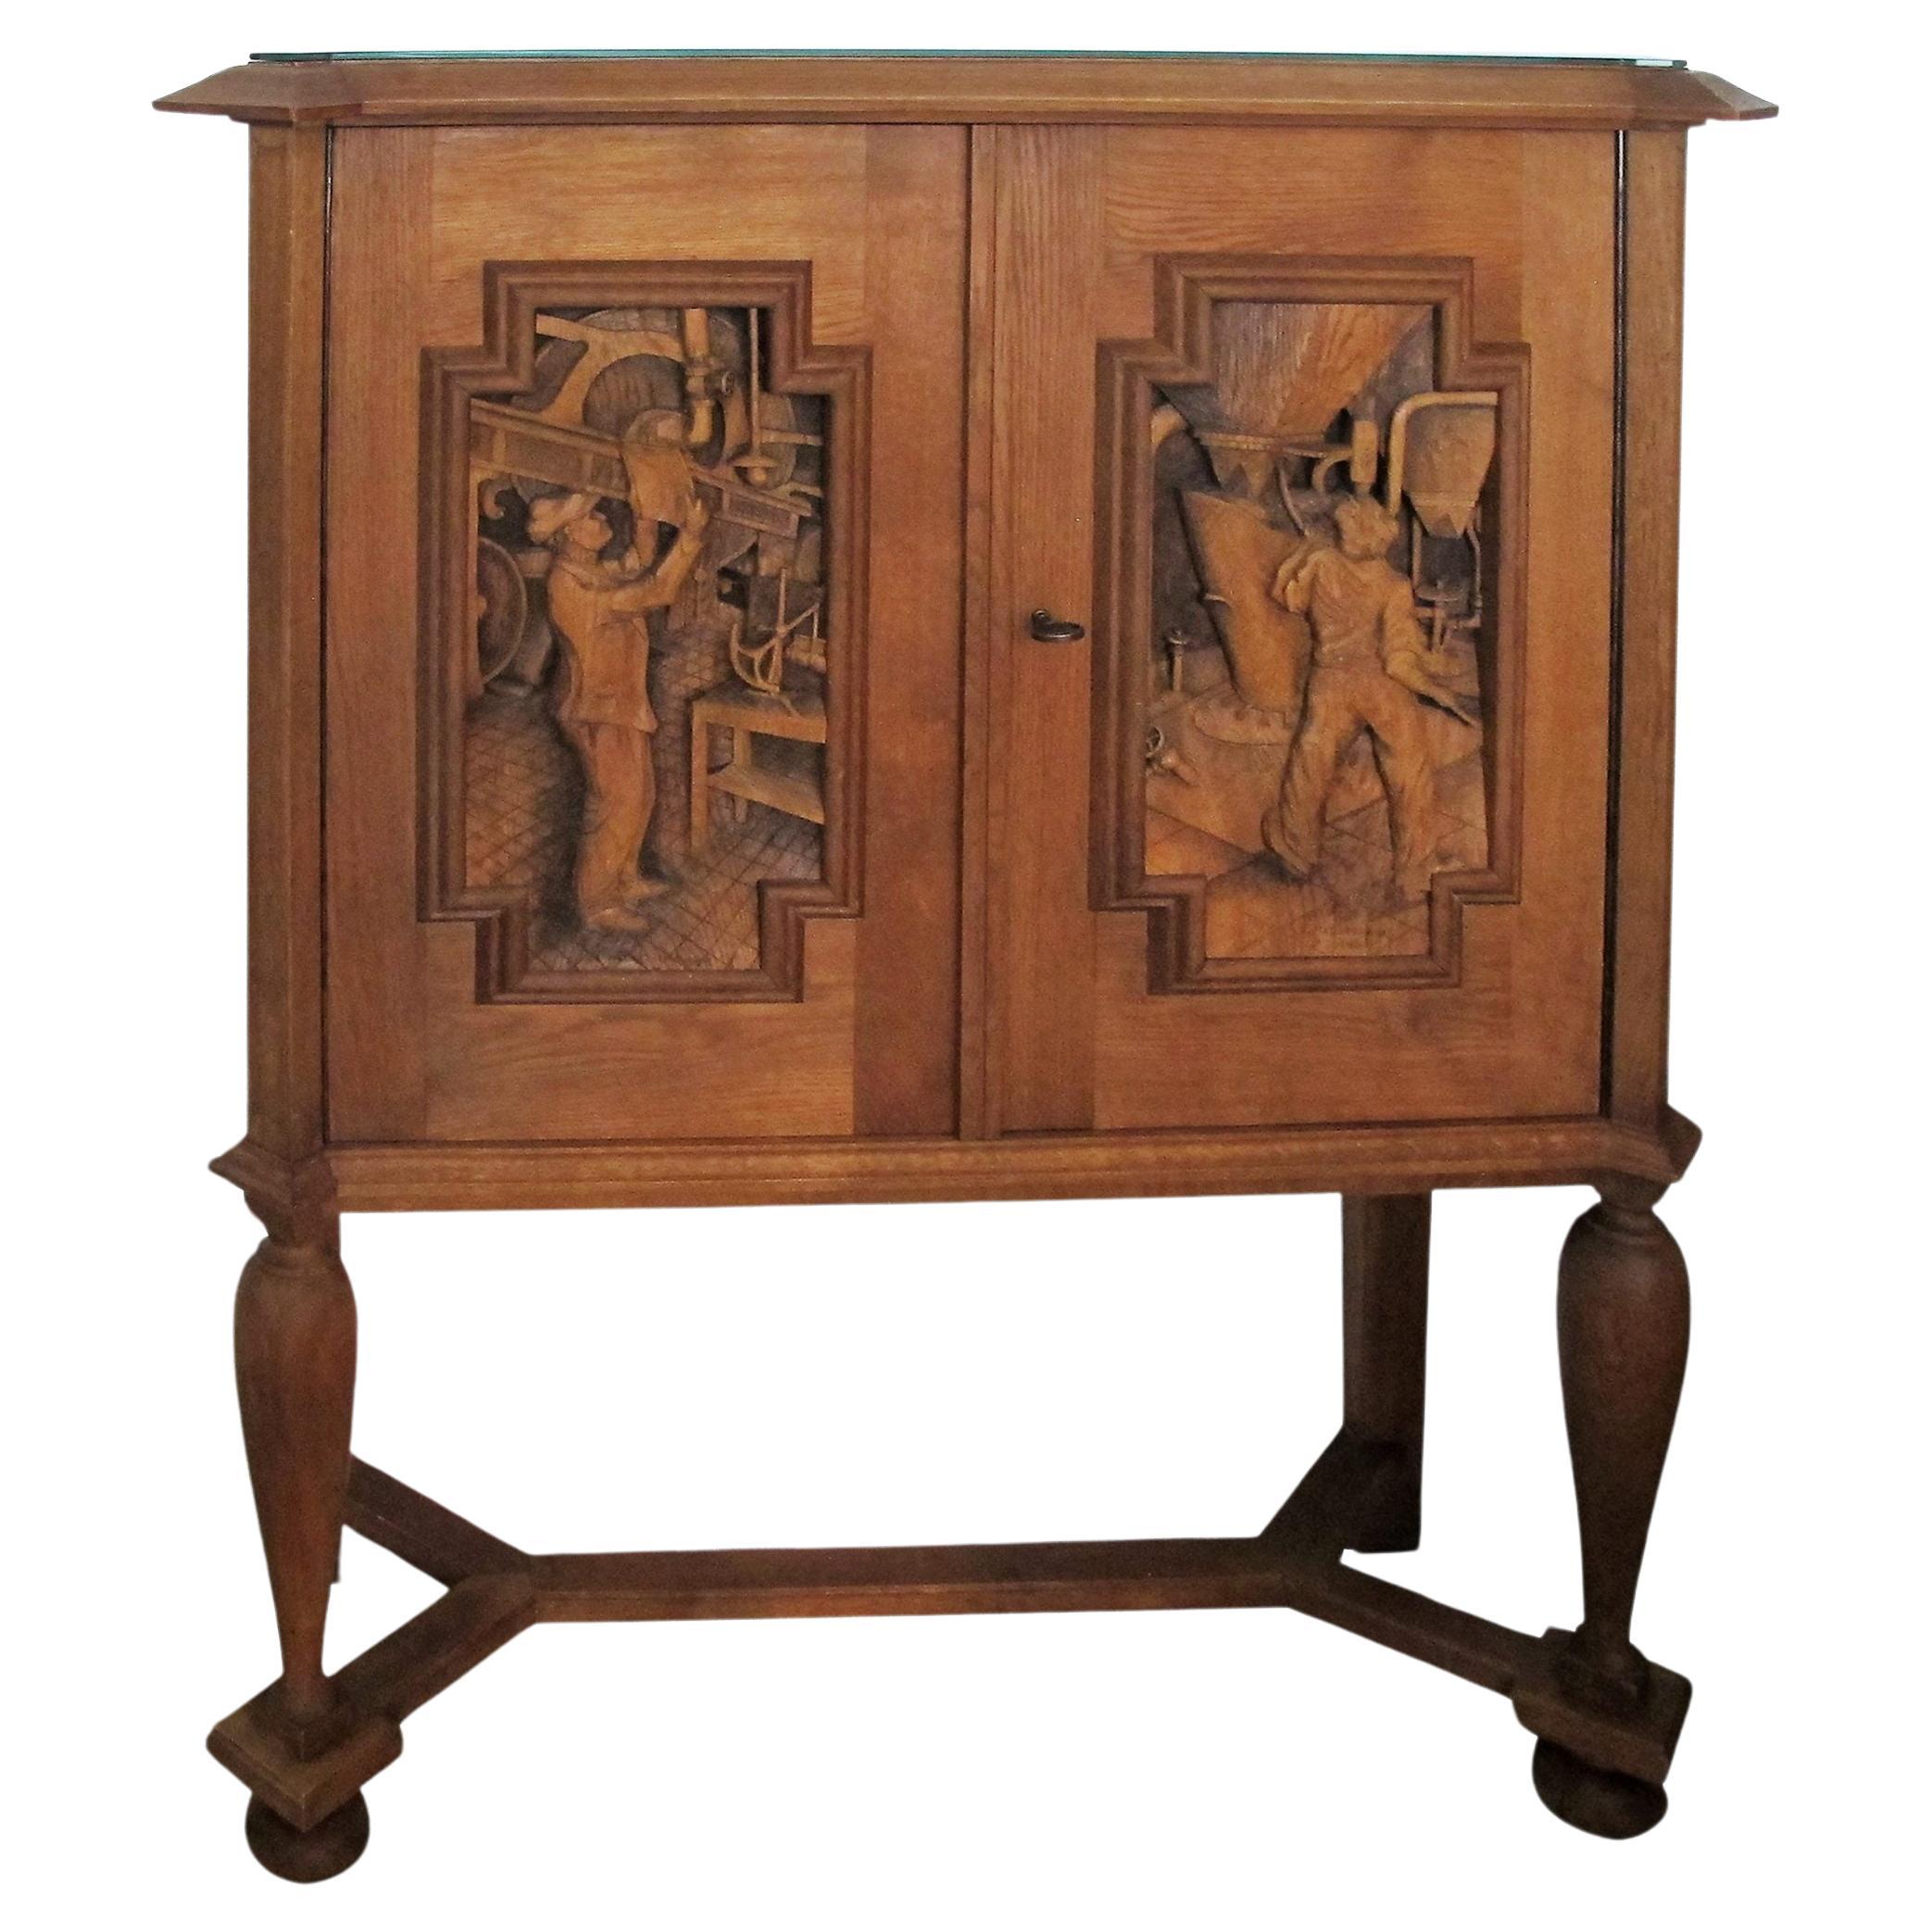 A 1940’s E. Hallanvaara oak cabinet with carvings on the doors, Finnish  For Sale